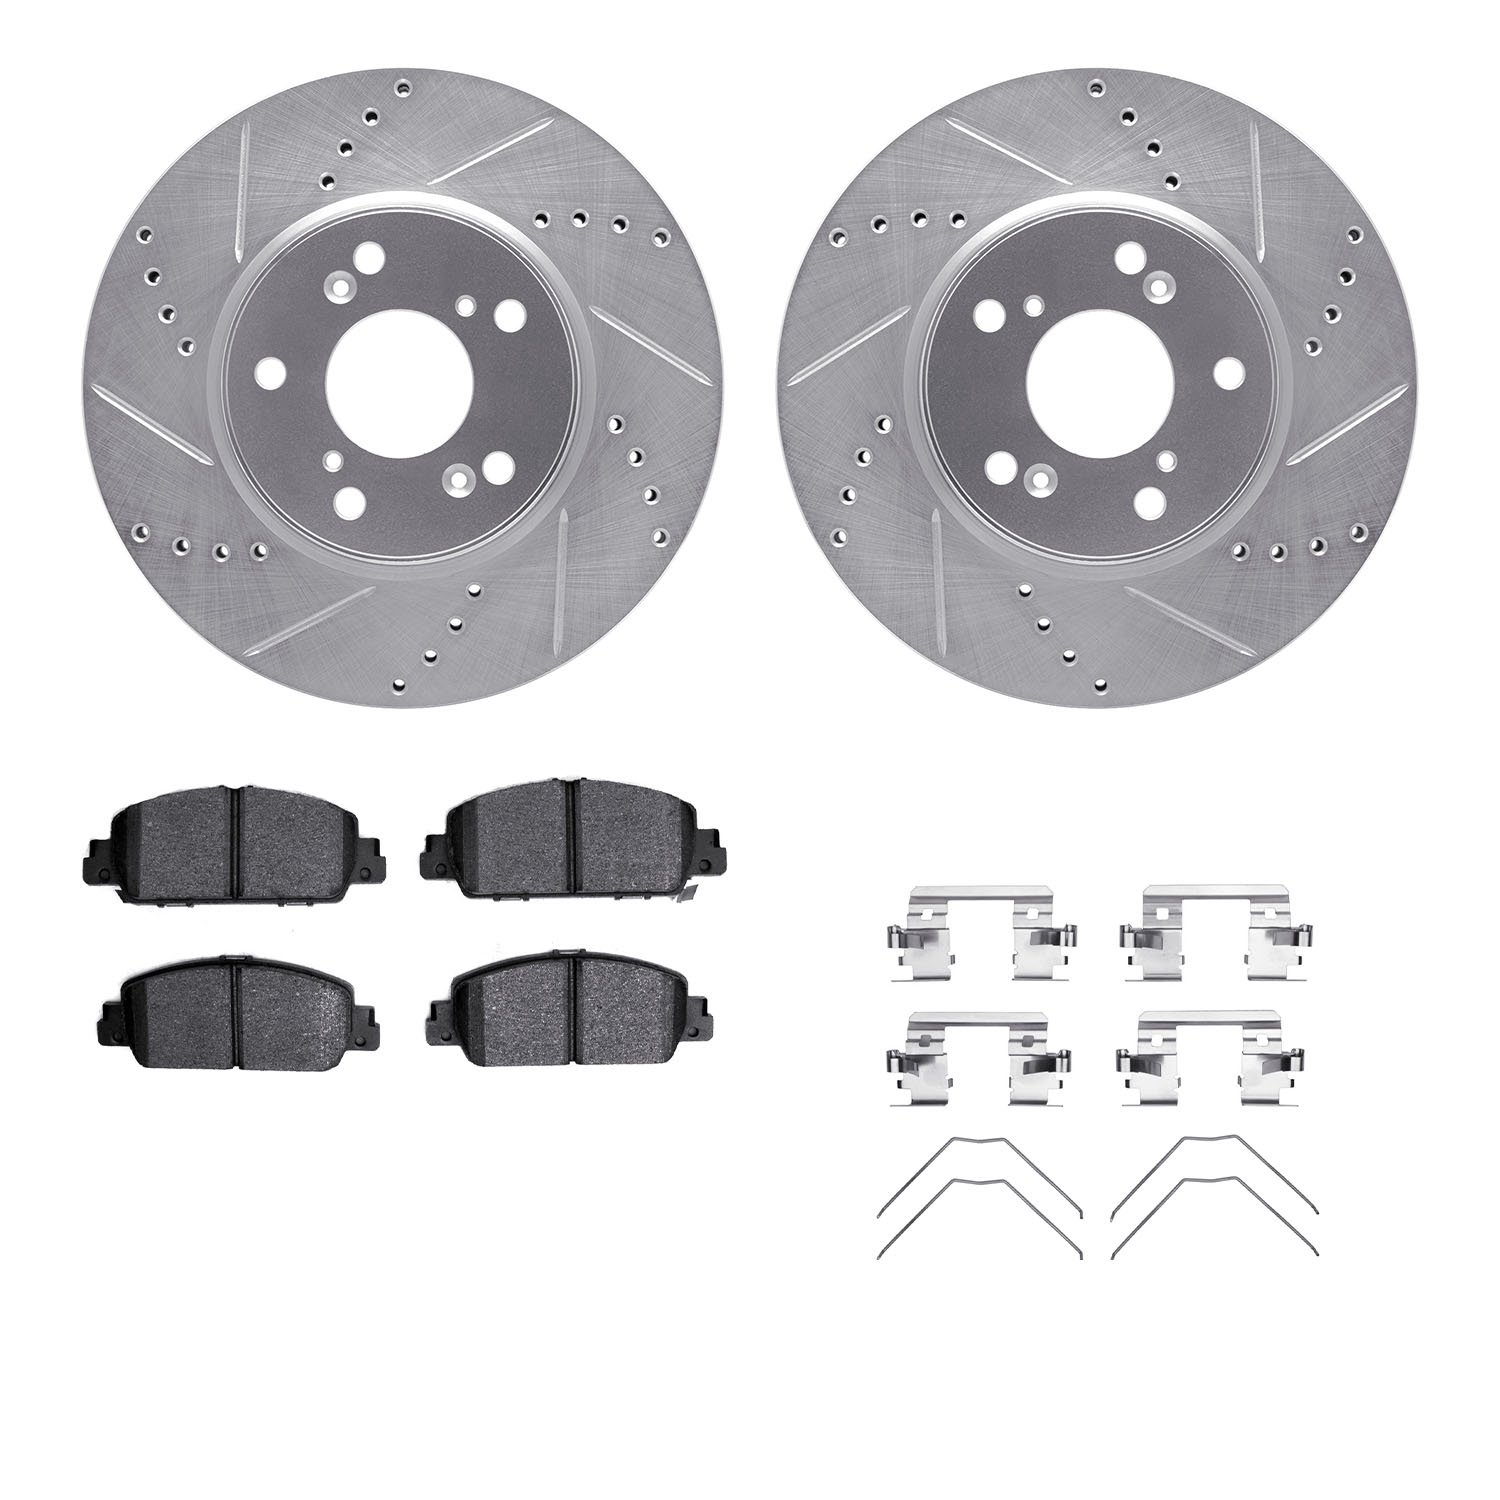 7312-59096 Drilled/Slotted Brake Rotor with 3000-Series Ceramic Brake Pads Kit & Hardware [Silver], Fits Select Acura/Honda, Pos